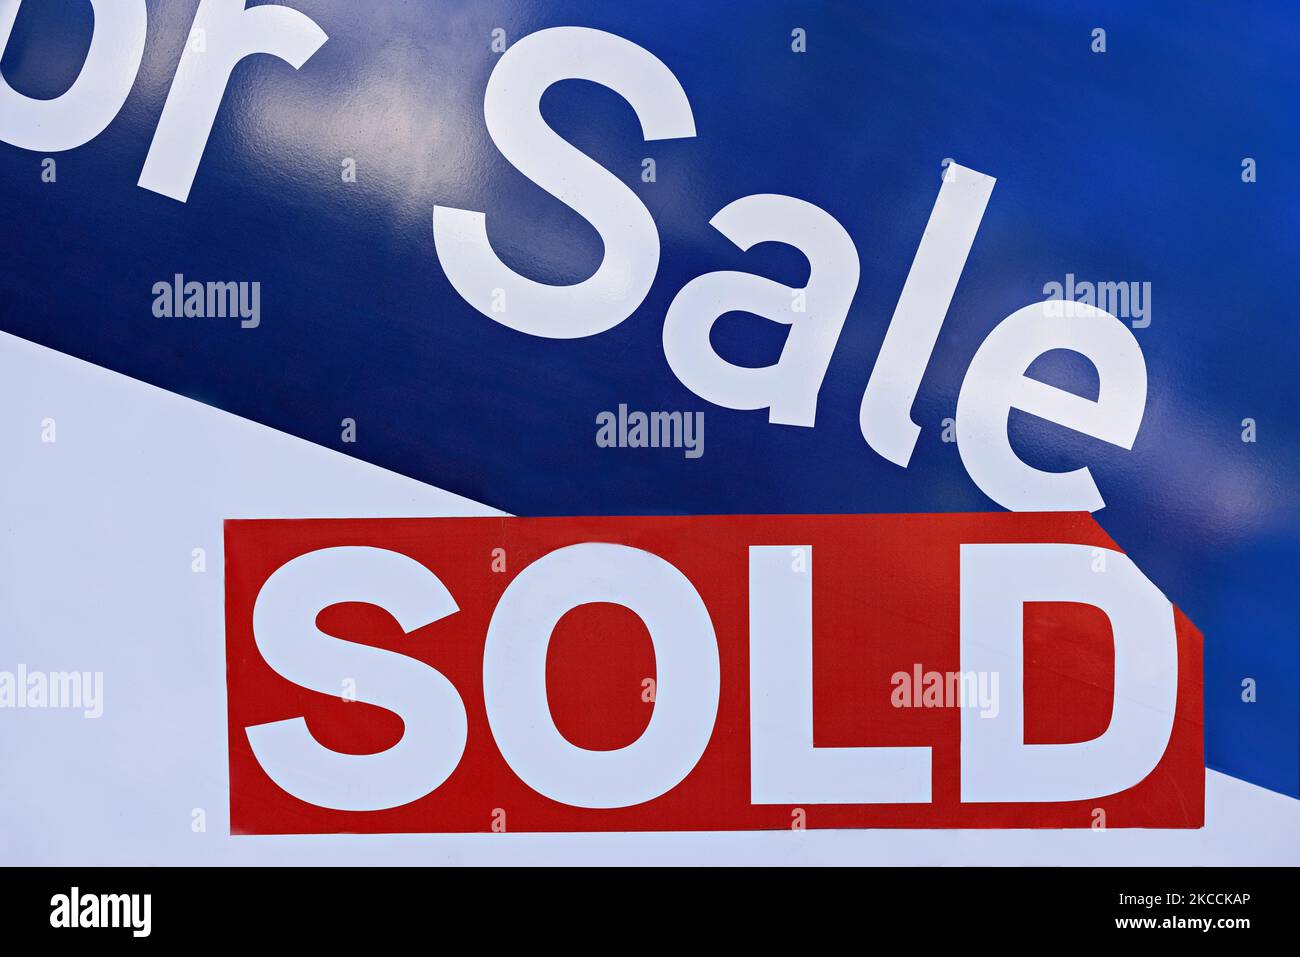 Ballarat Australia /  For Sale and Now Sold sign. Stock Photo